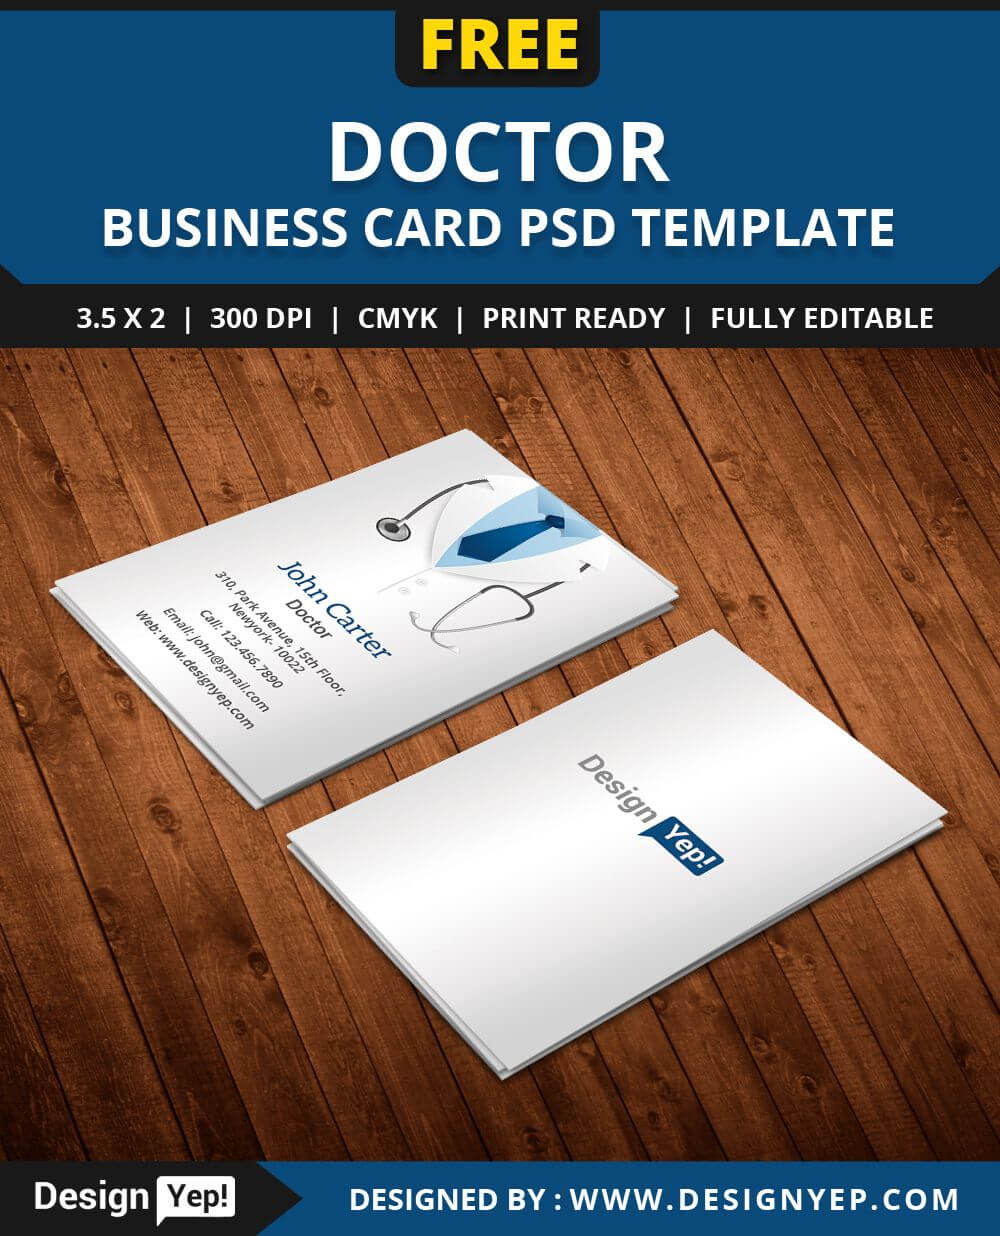 Free Doctor Business Card Template Psd | Business Card Psd In Medical Business Cards Templates Free